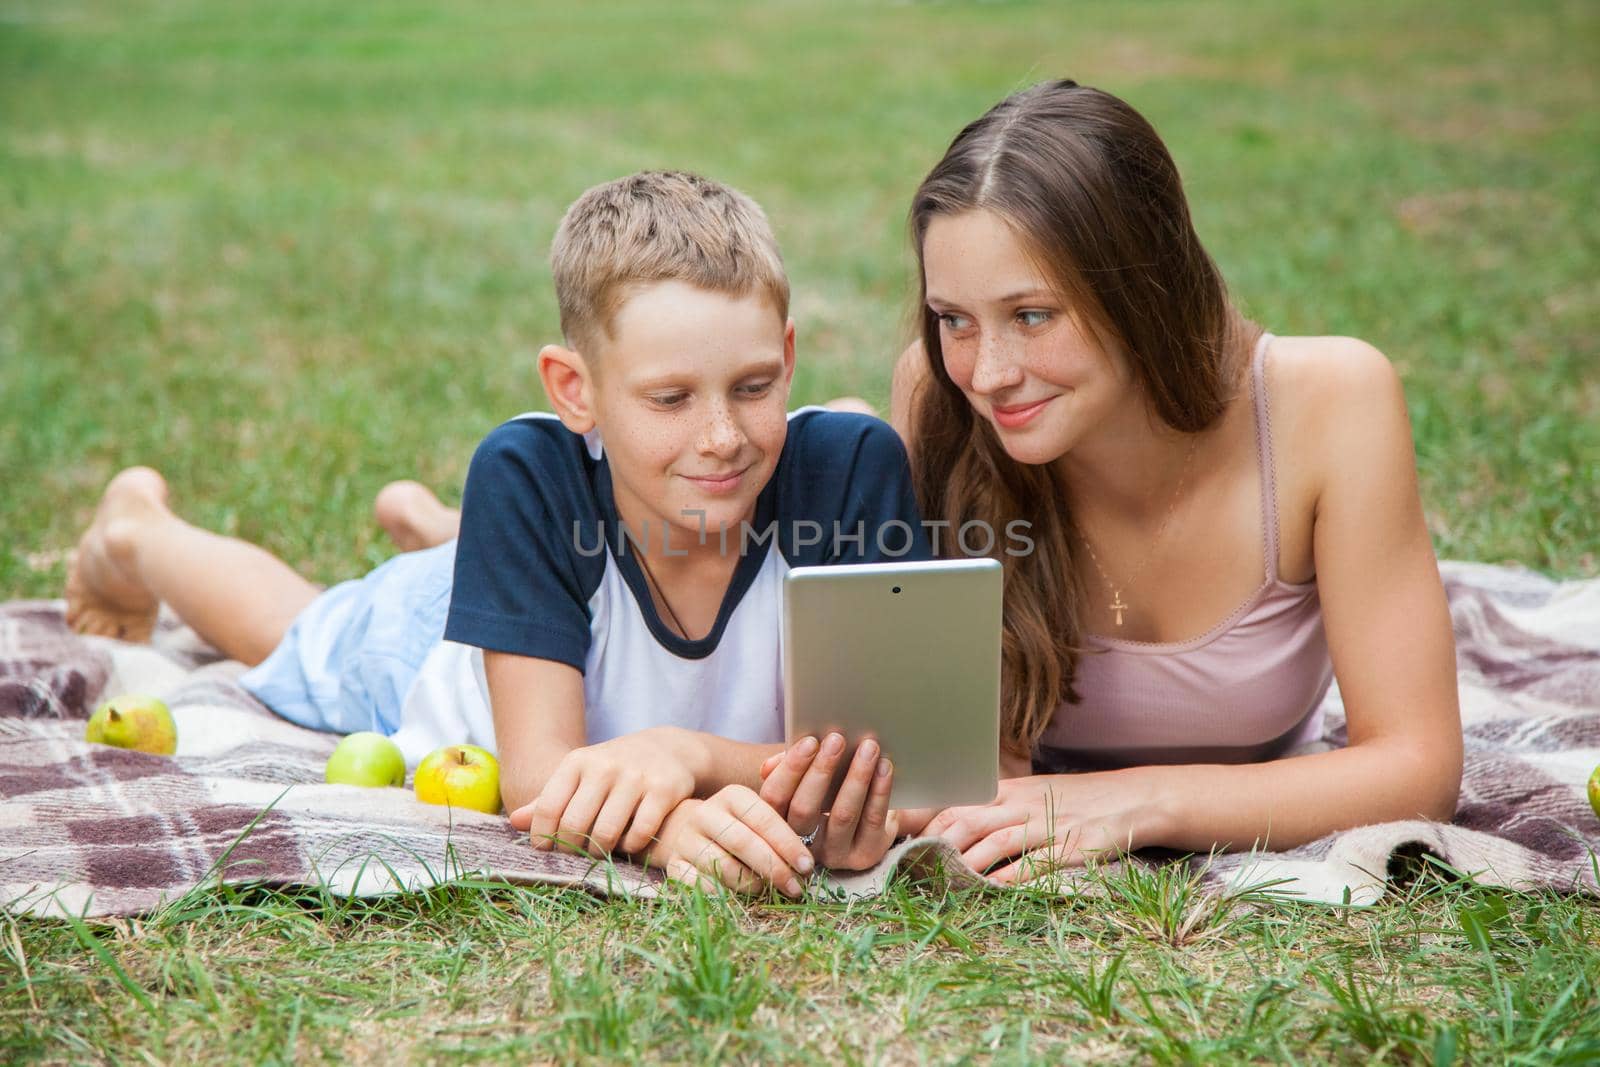 Young sister and brother with freckles on their faces lying down on plaid and using tablet in park. looking at tablet and smiling.